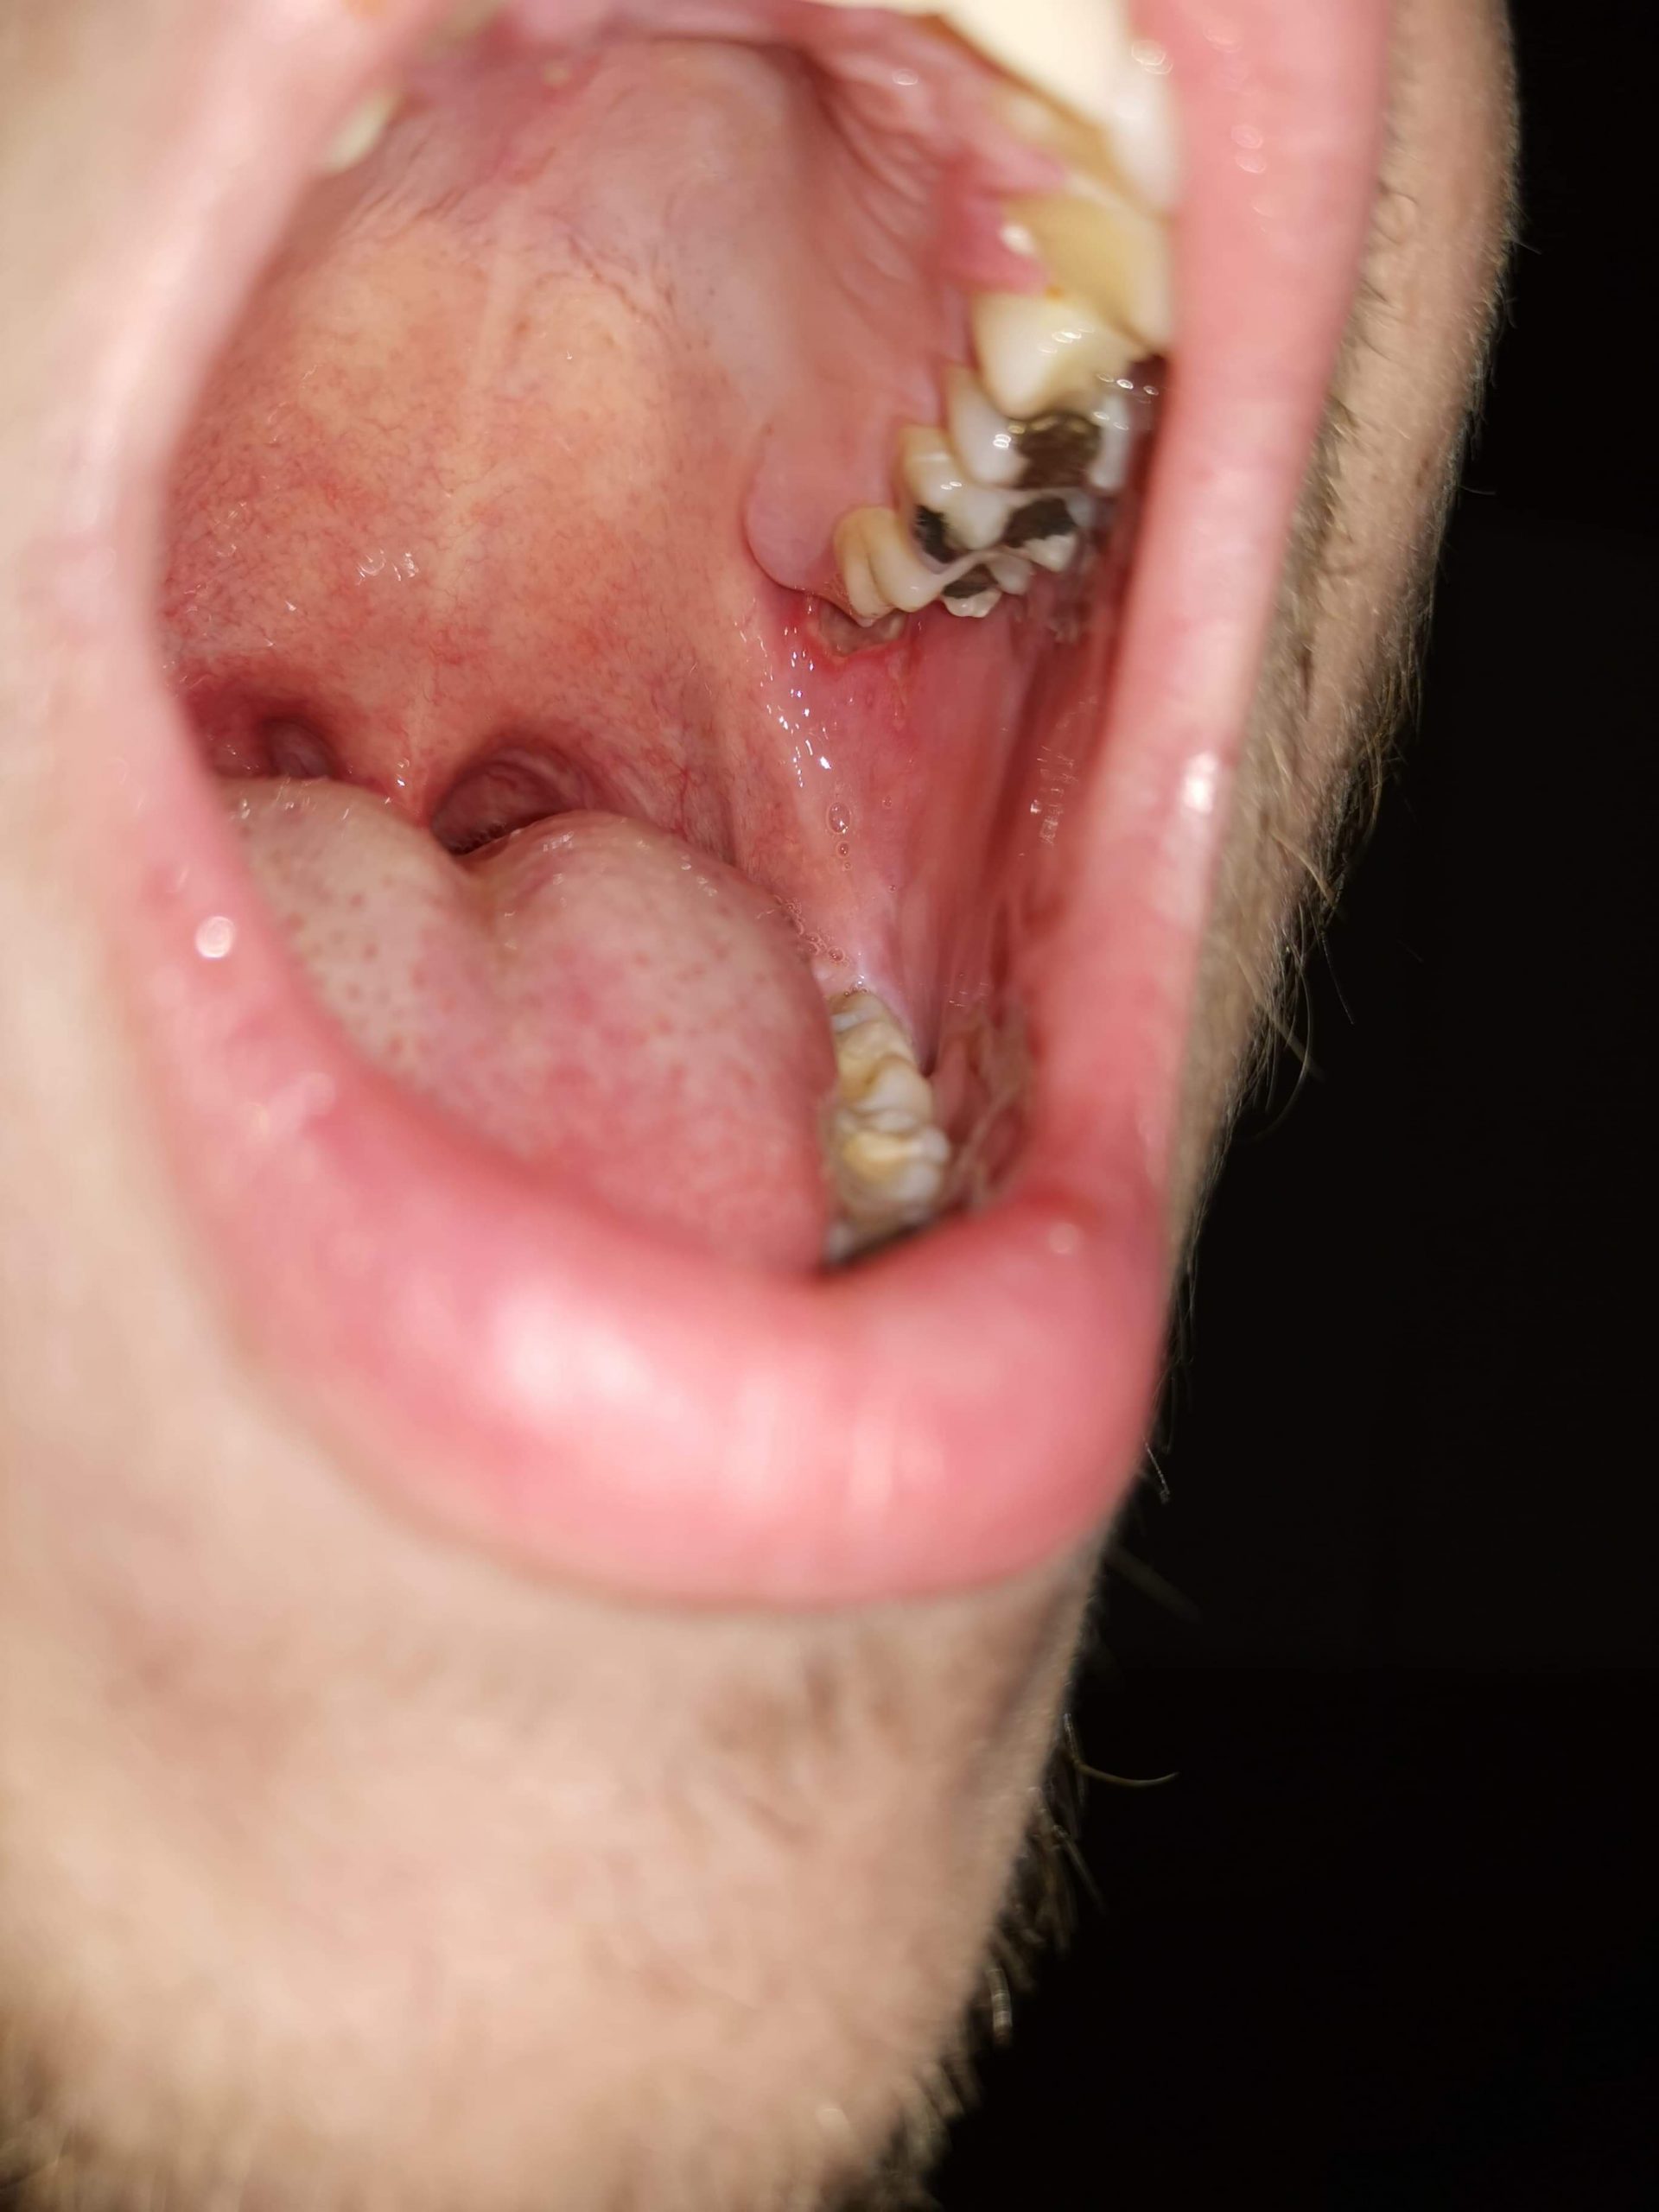 Guys, please help! Wisdom tooth made me a crater like hole ...